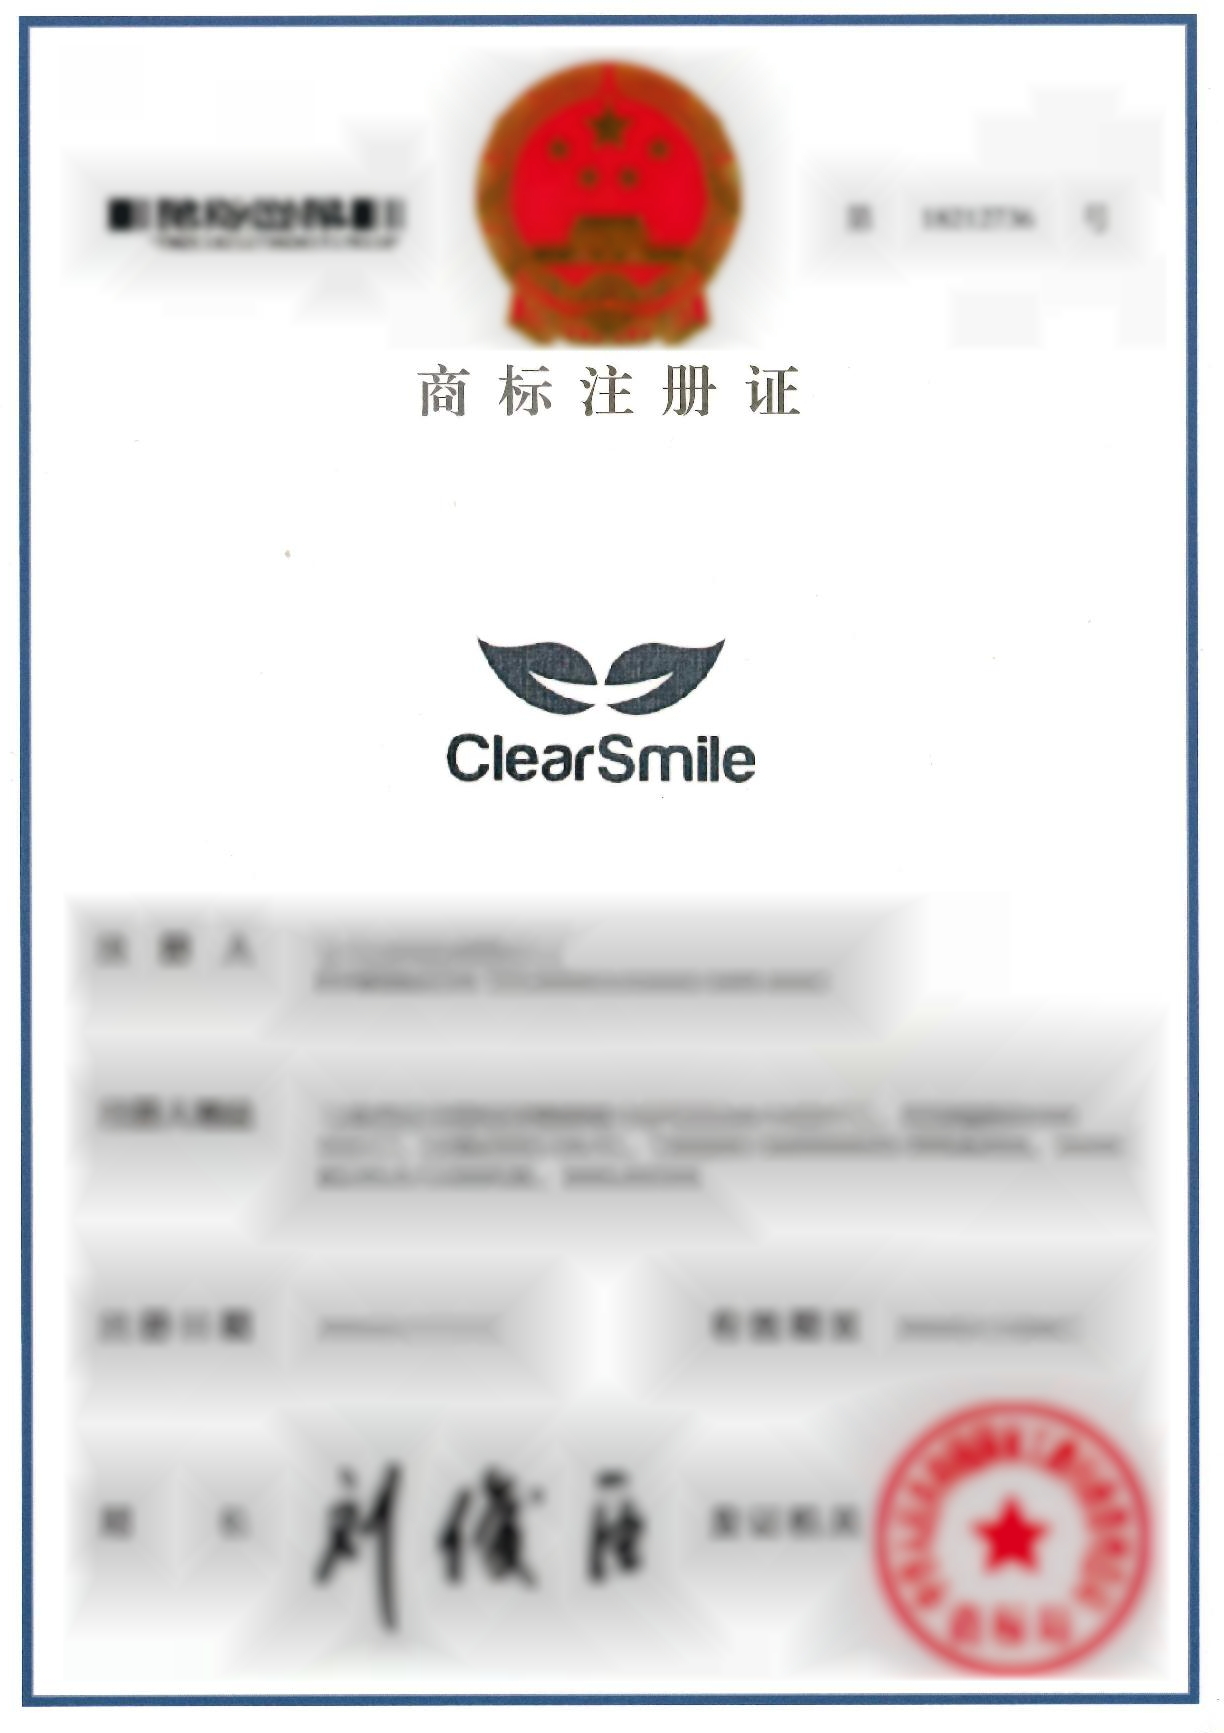 ClearSmile Brand is Registered in China